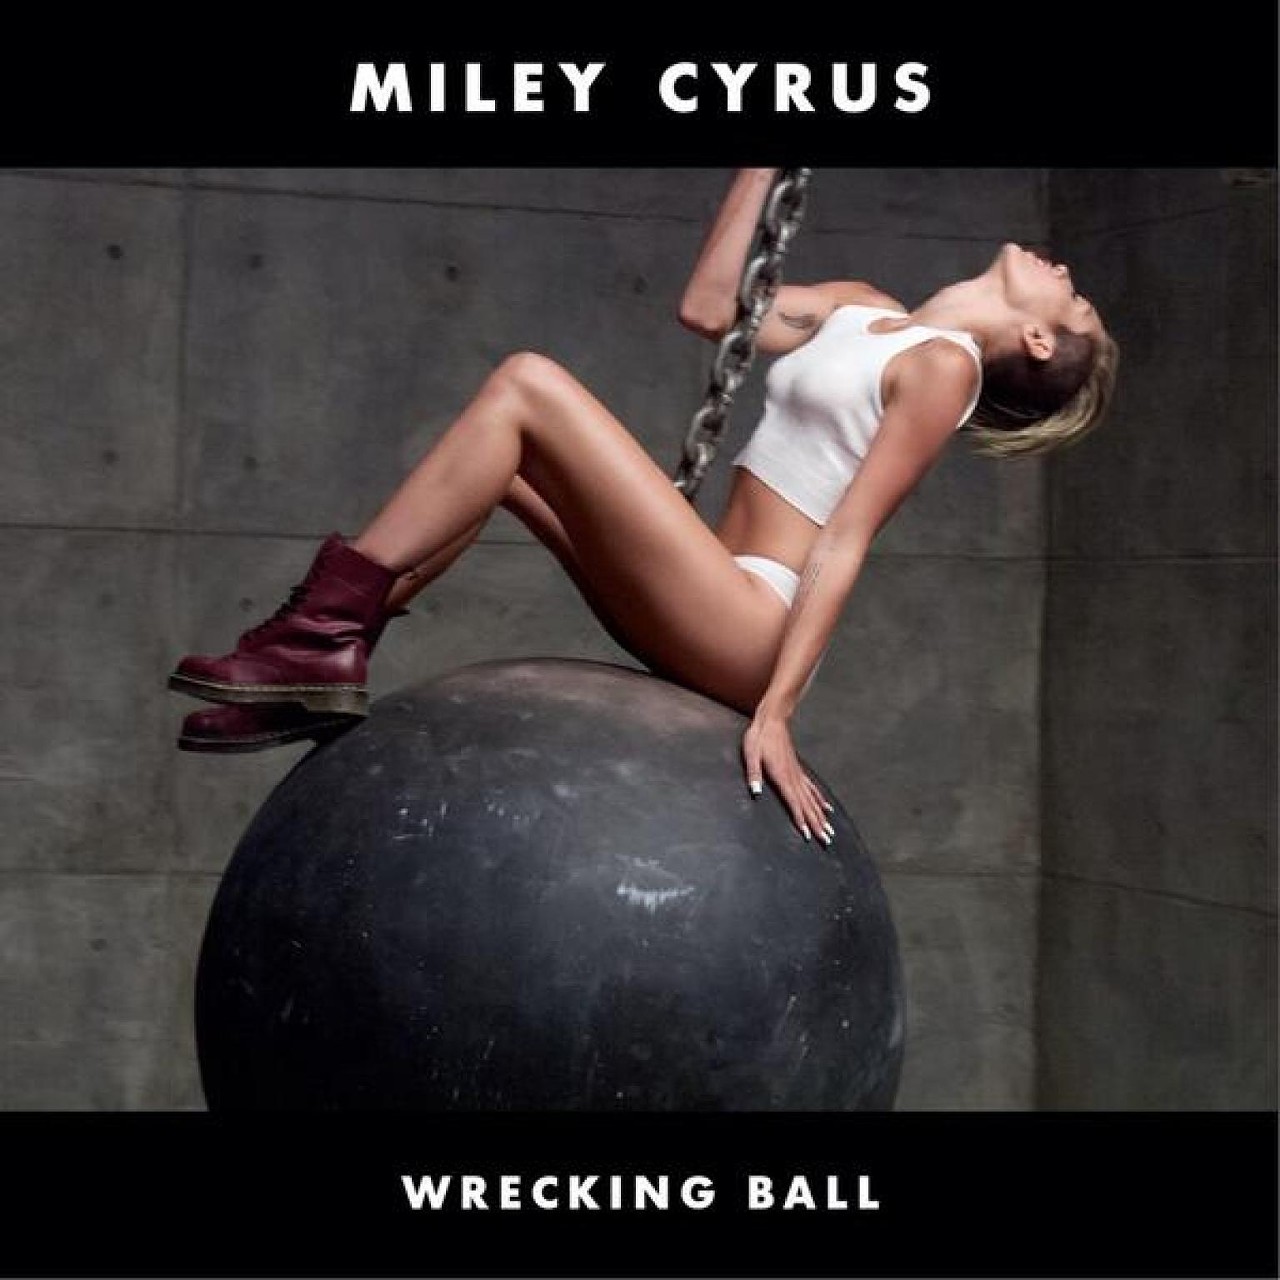 15. Miley Cyrus, "Wrecking Ball" (23 Votes)